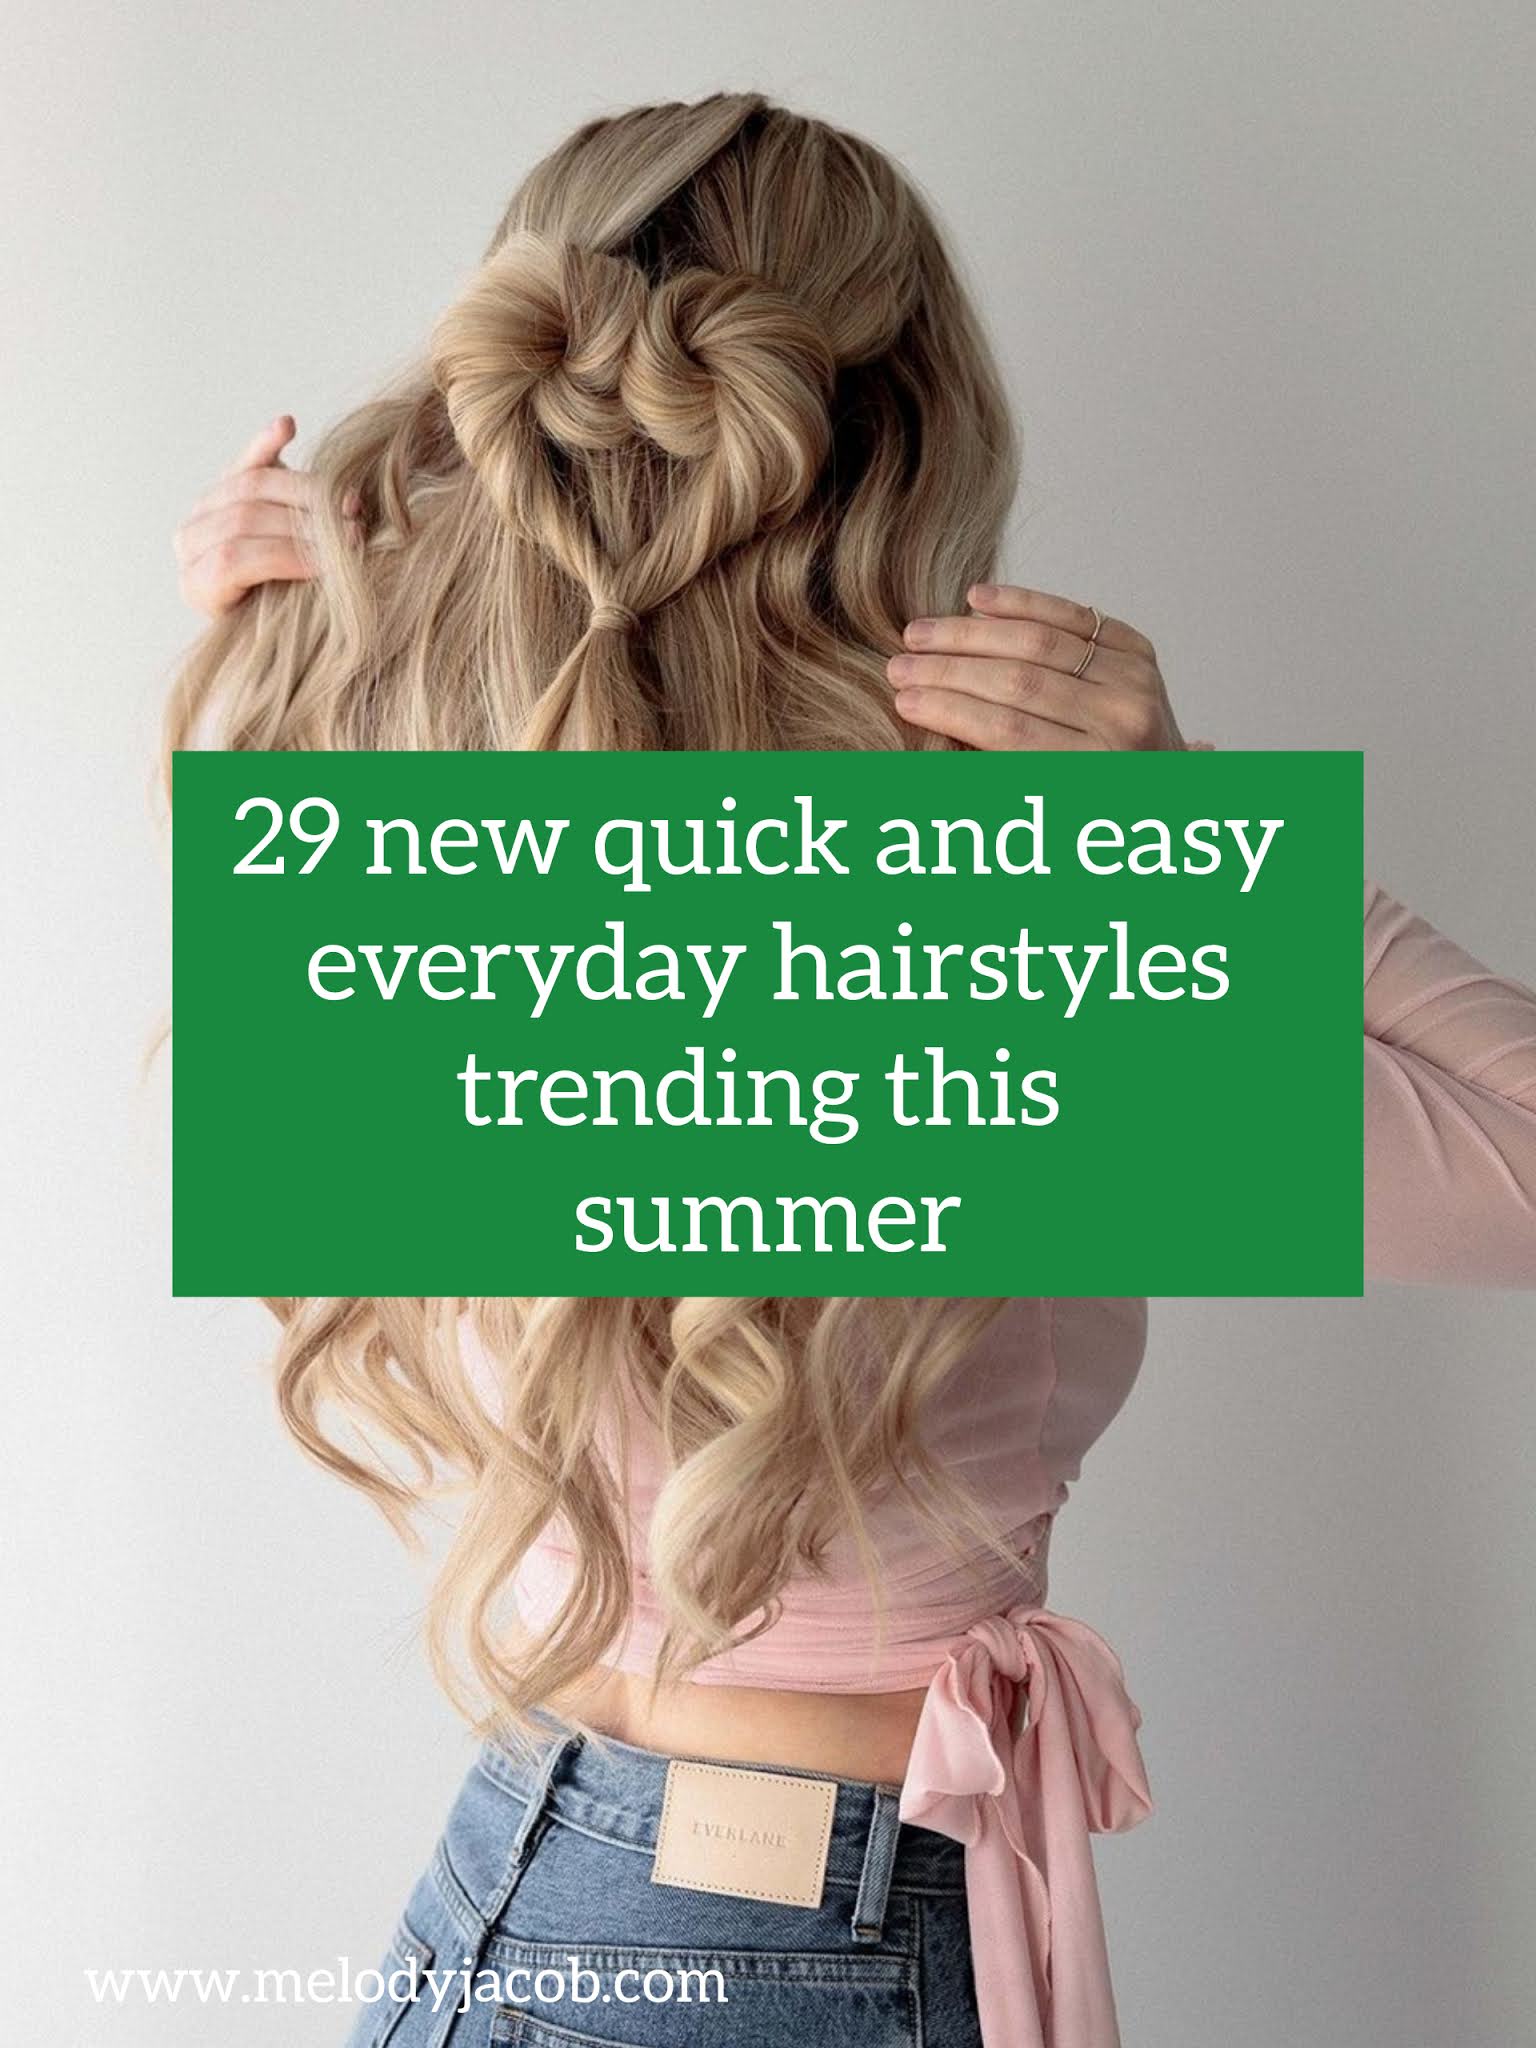 29 Quick and easy hairstyles perfect for prom, weddings, graduation and summer.